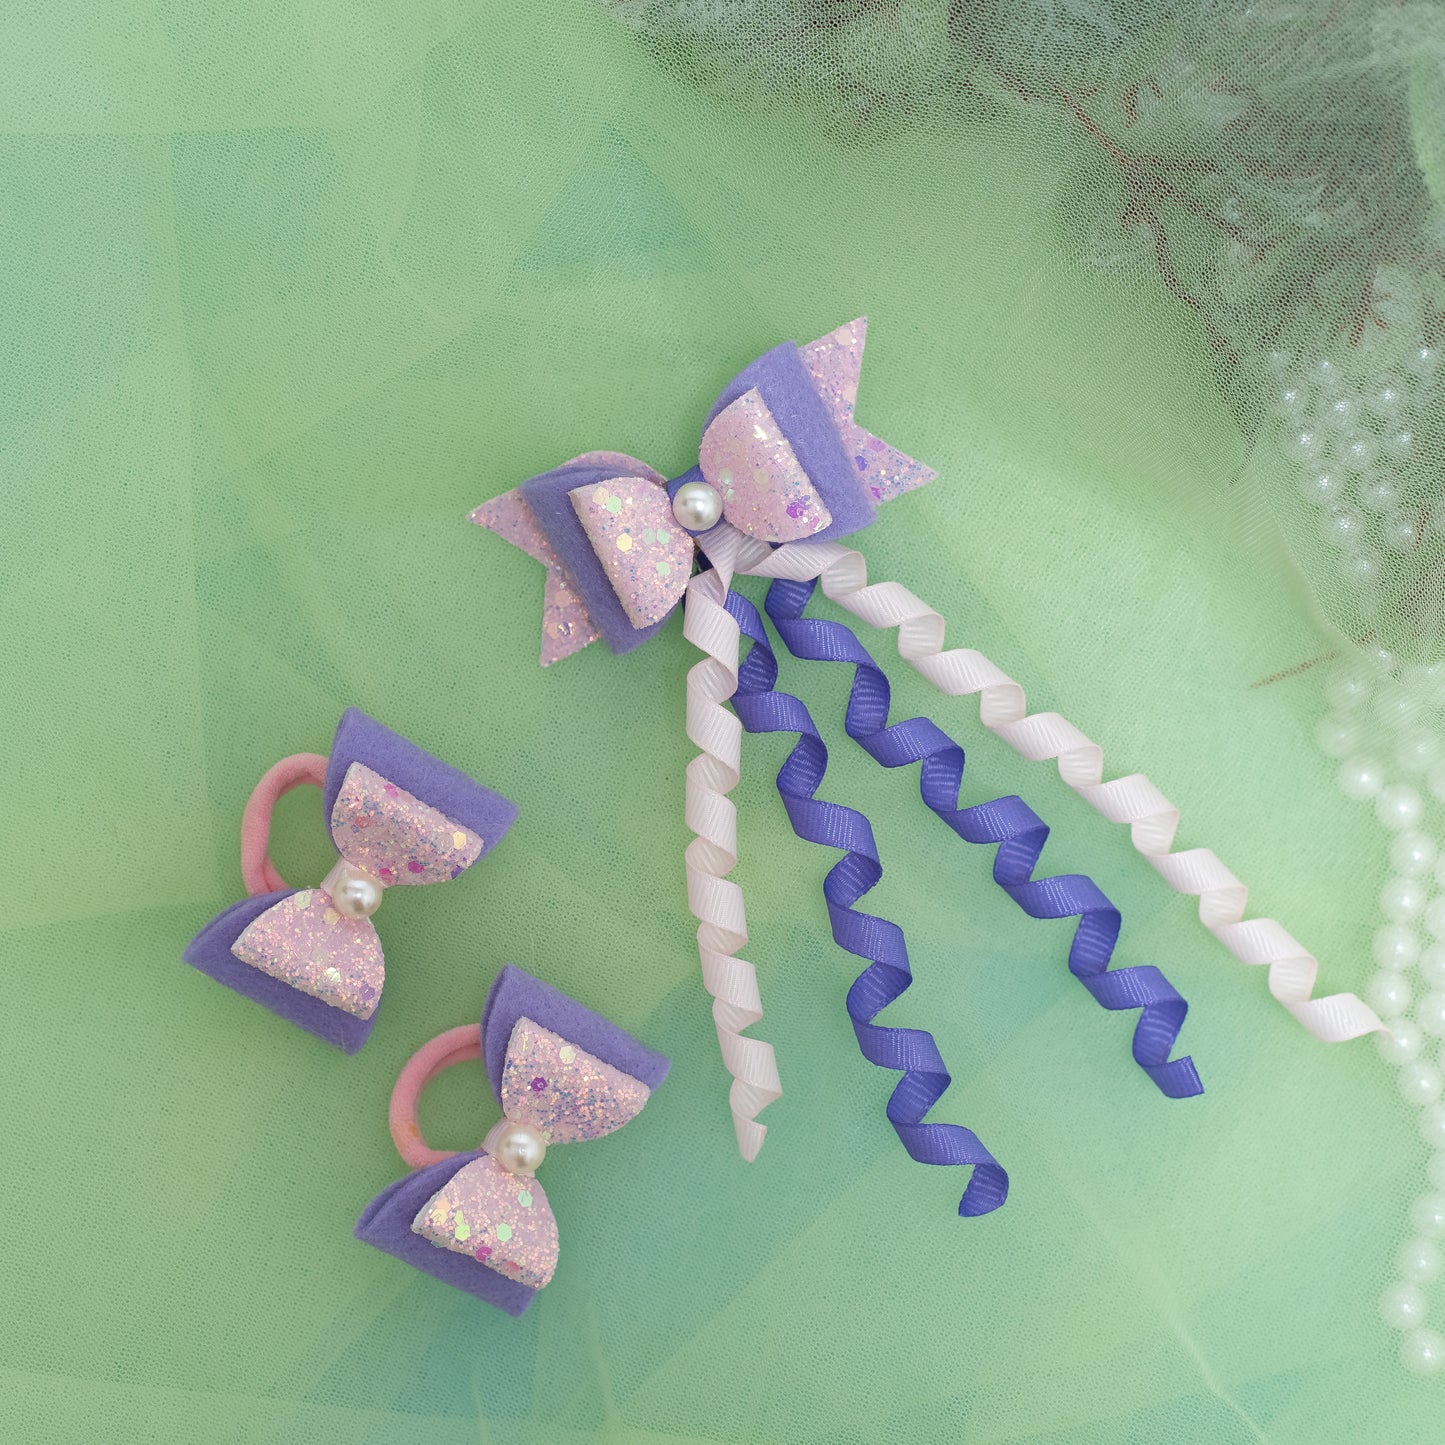 Combo: 1 Dangler Hair-pin and 2 Rubberbands with Fancy Shimmer Bow for Party -  Light Pink, Purple